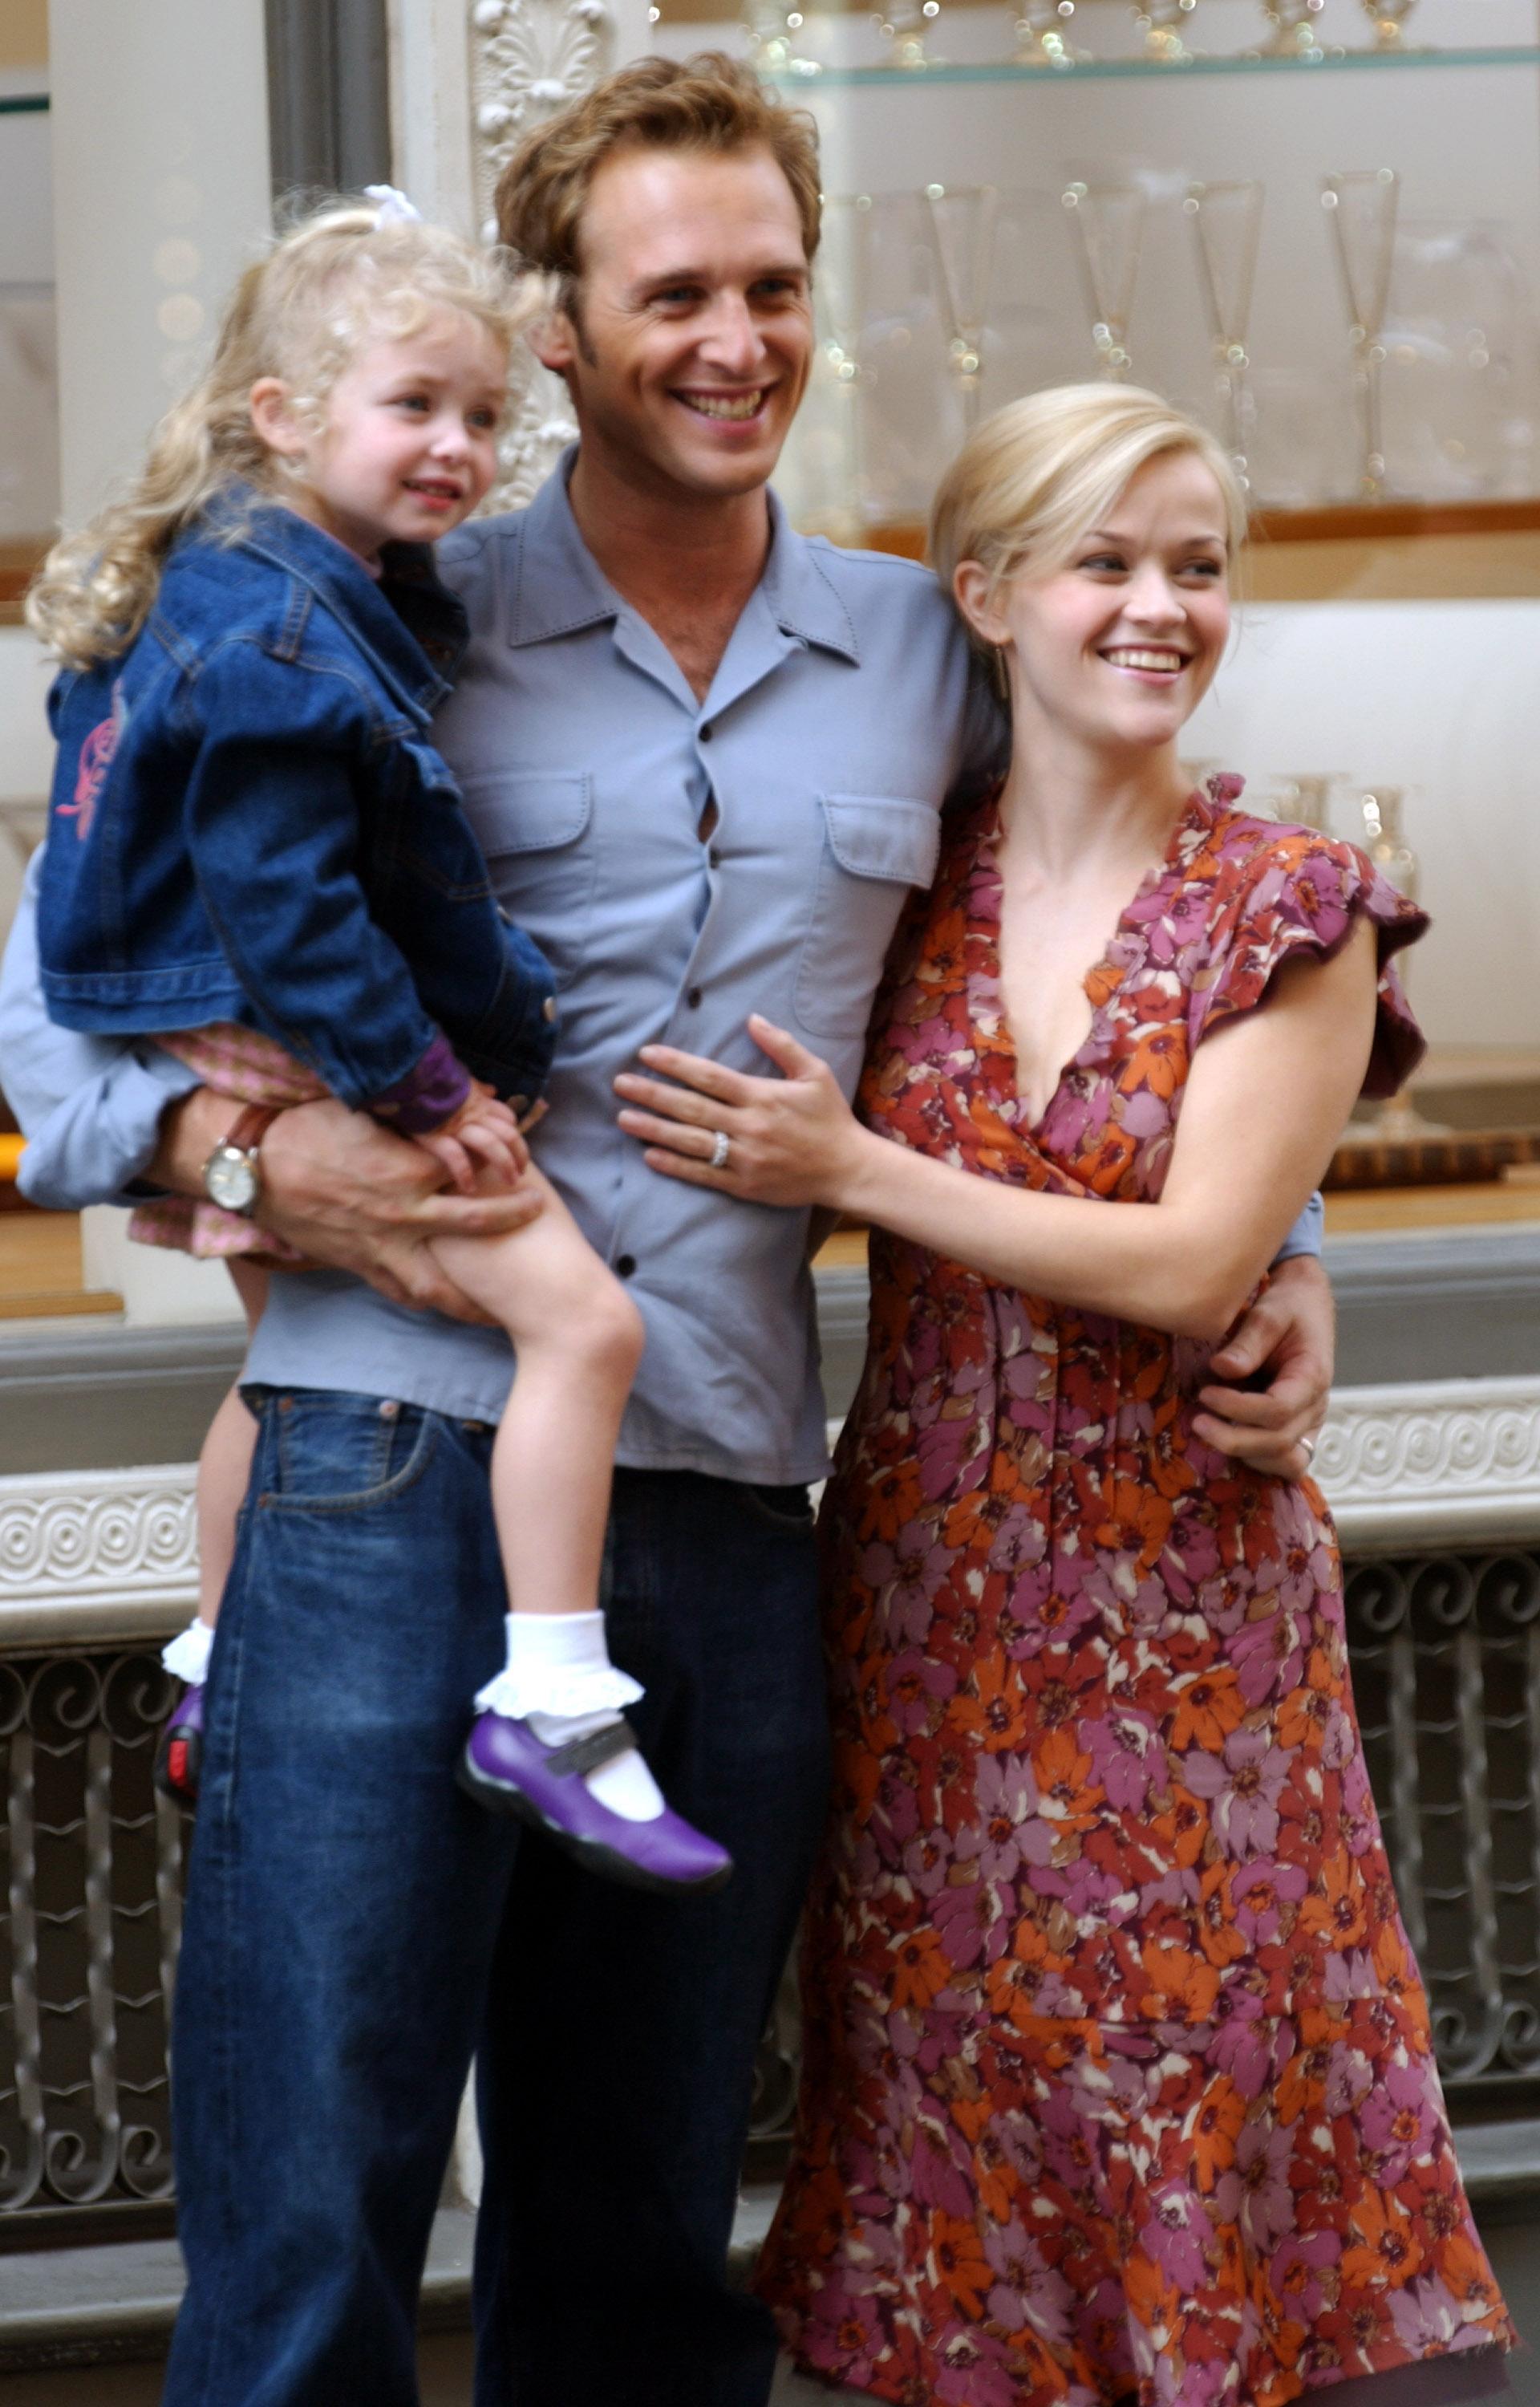 Reese Witherspoon and Josh Lucas filming 'Sweet Home Alabama